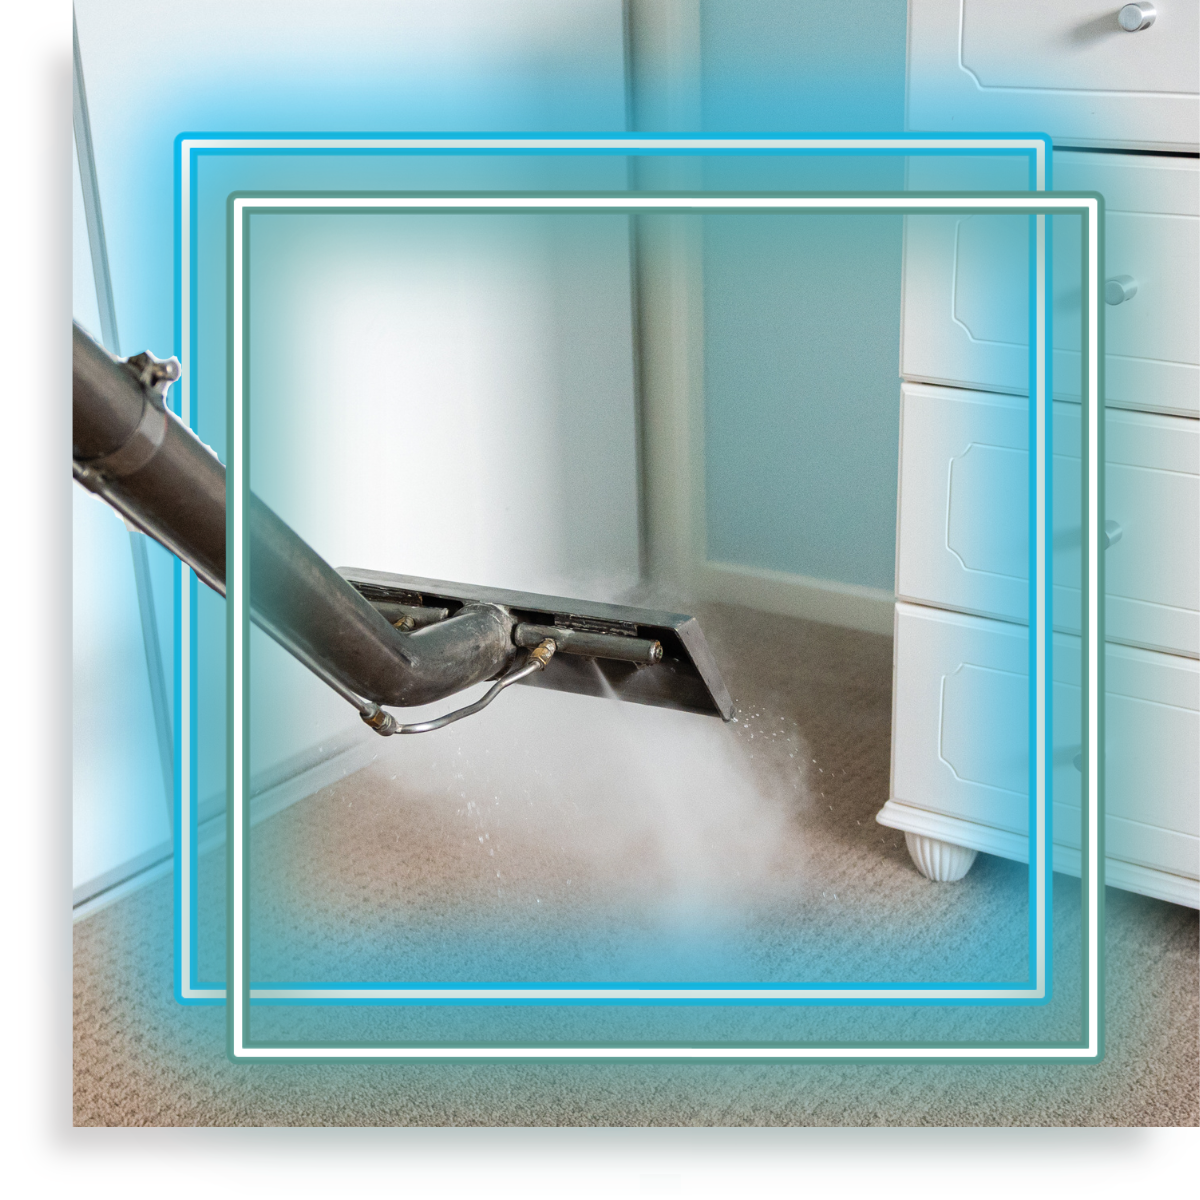 carpet cleaning manchester image 130